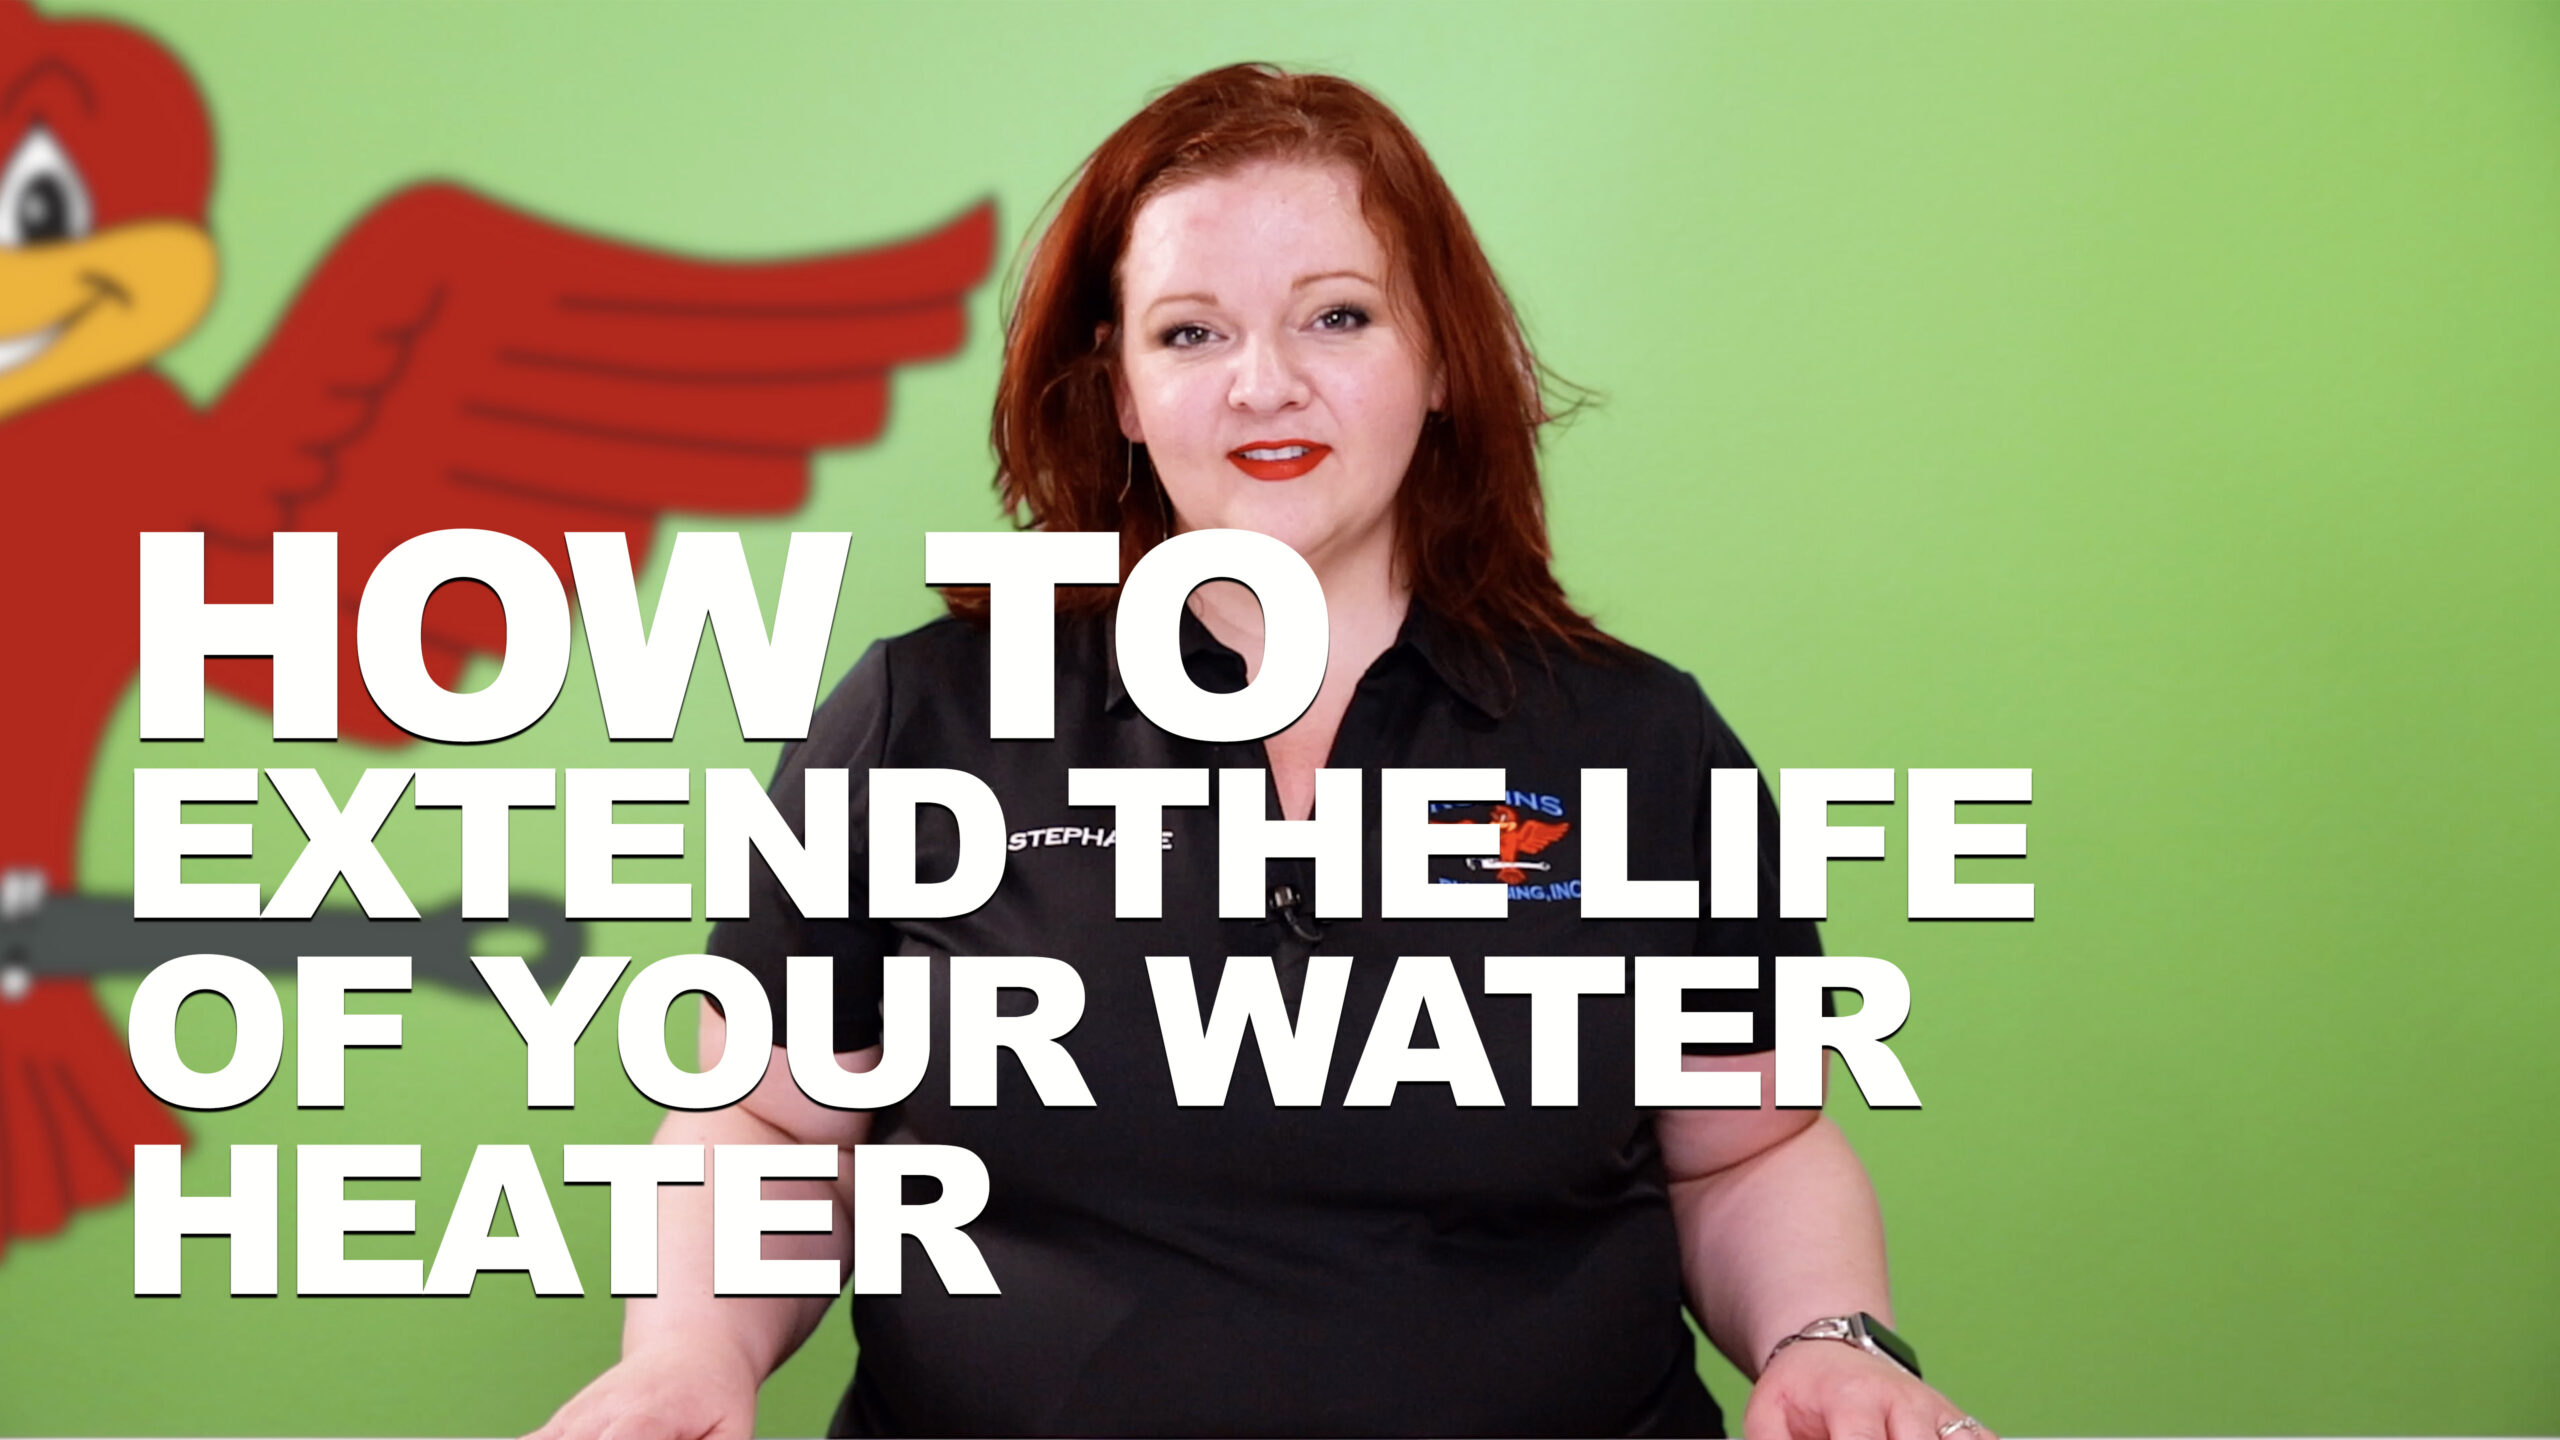 Cover photo for blog and video "How to Extend the Life of Your Water Heater"